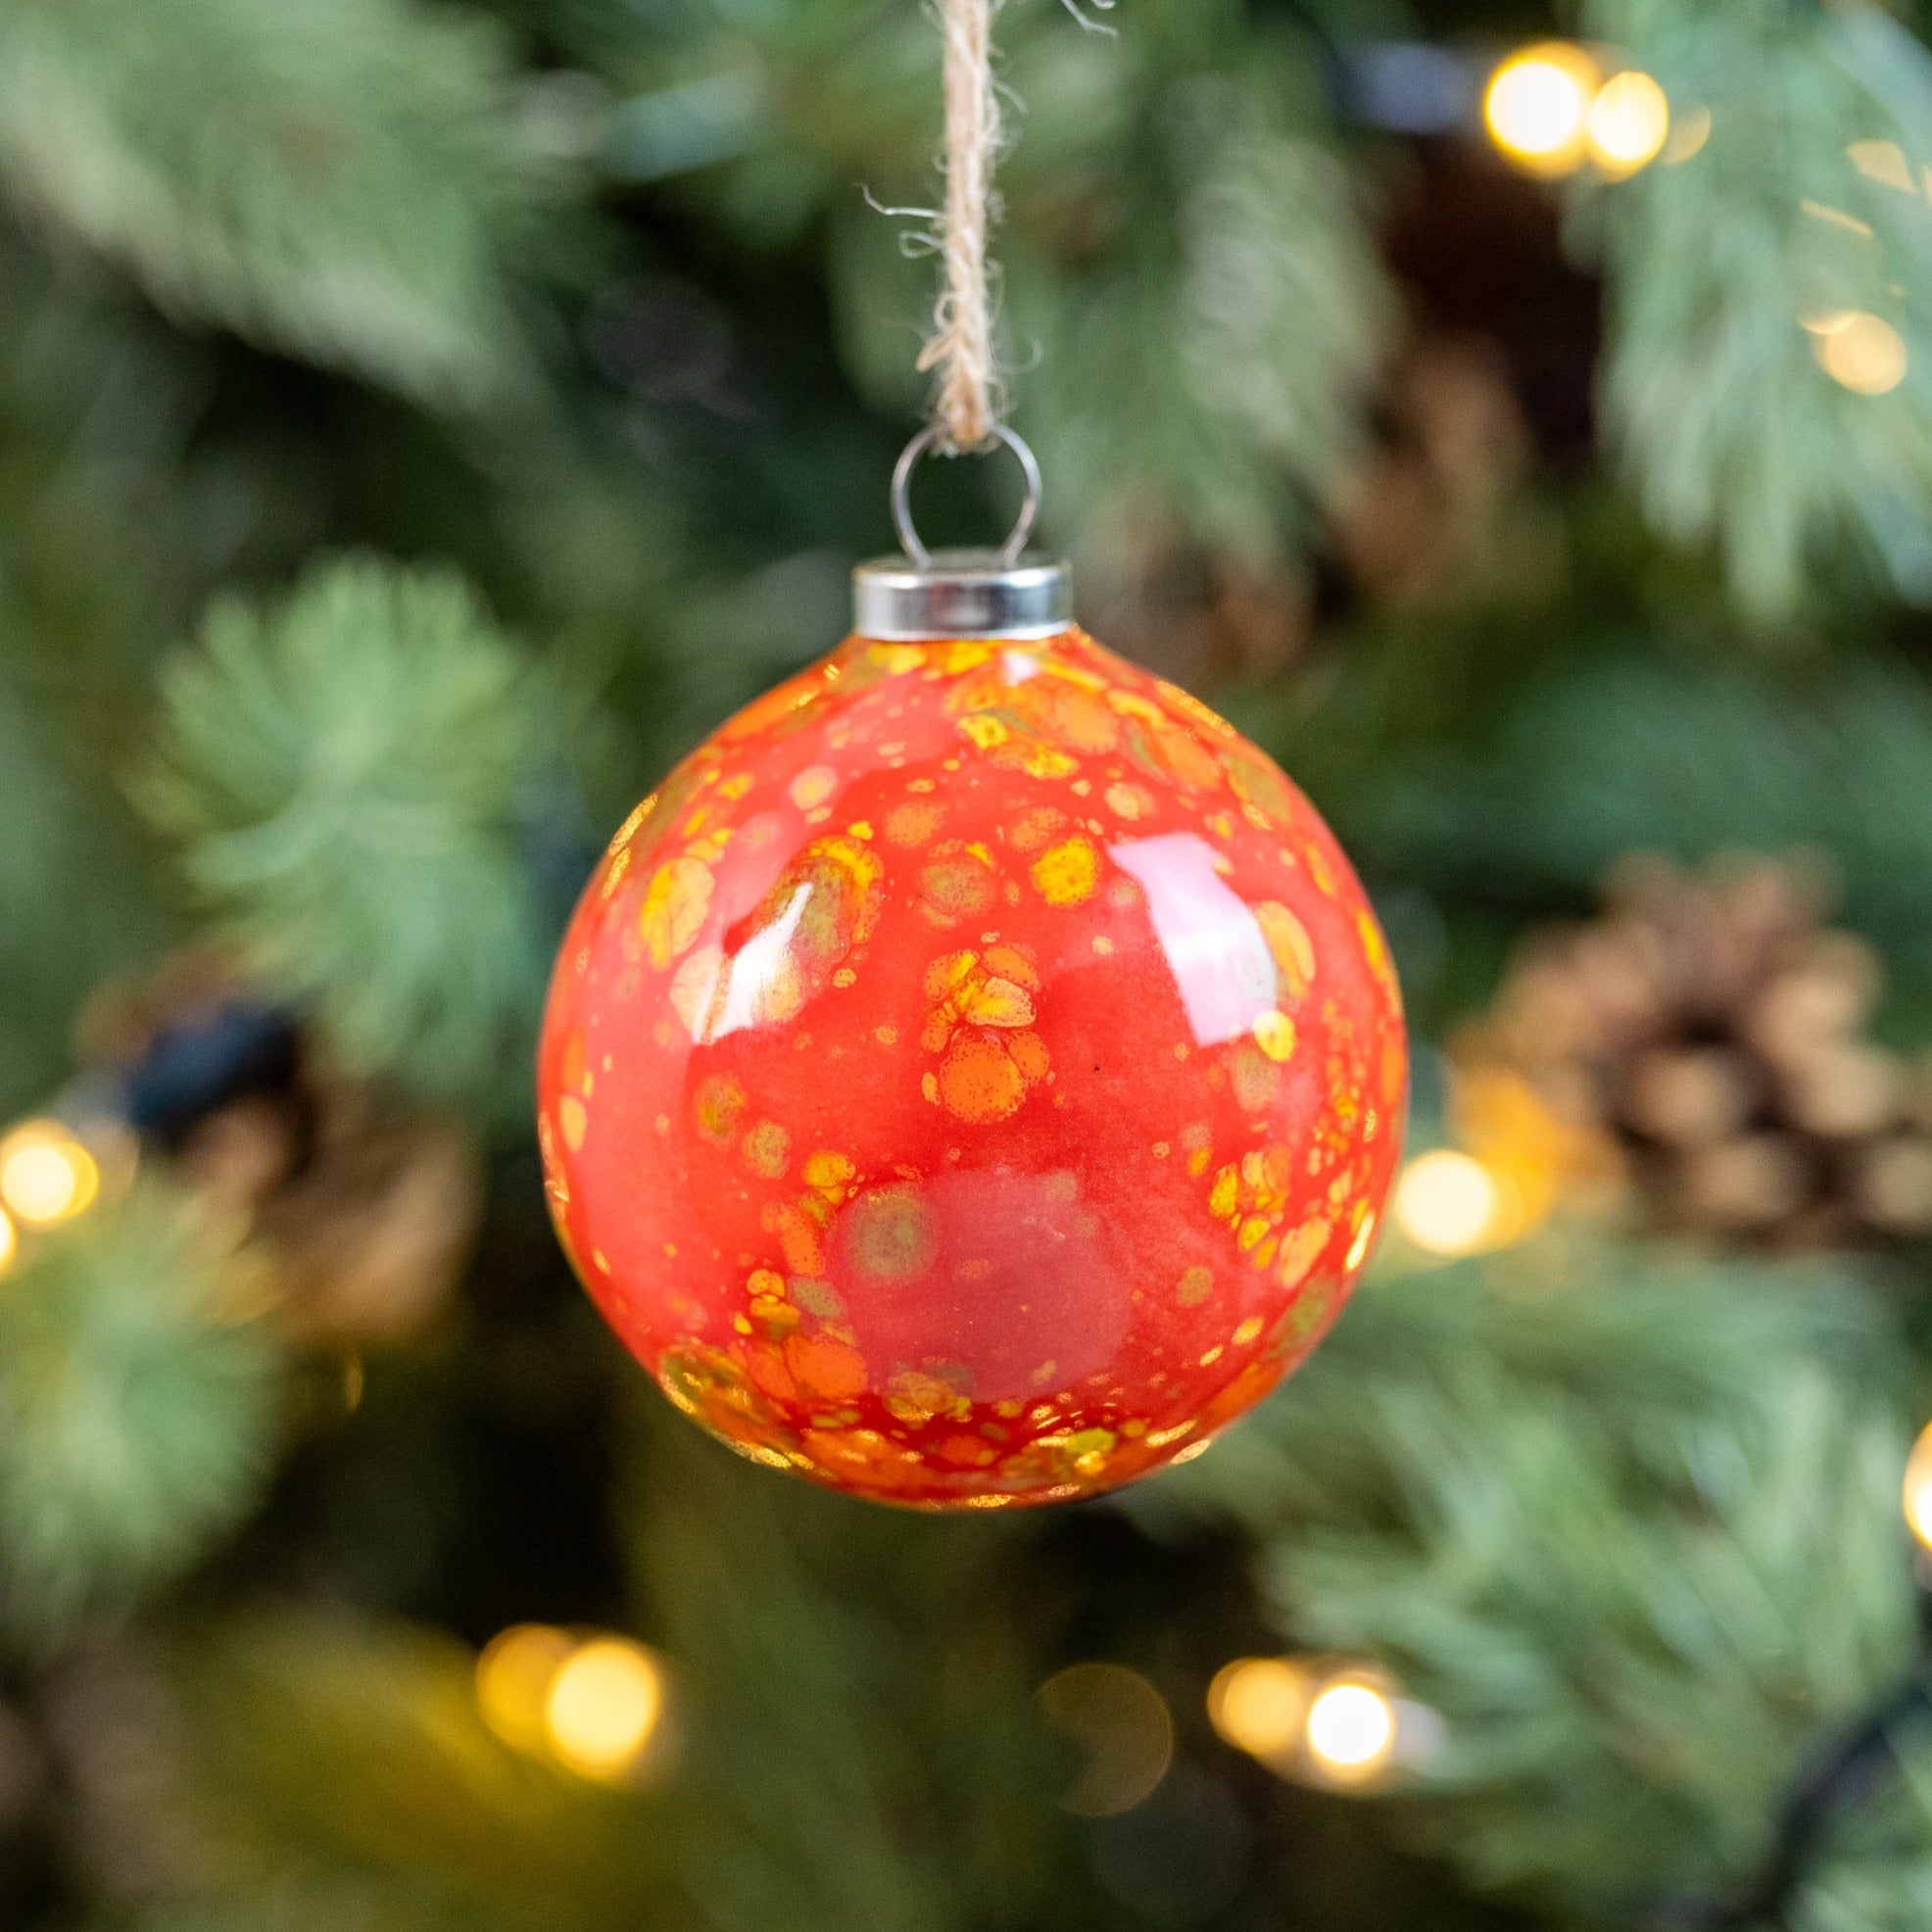 Red Hand-Painted Ceramic Bauble | Round Shape